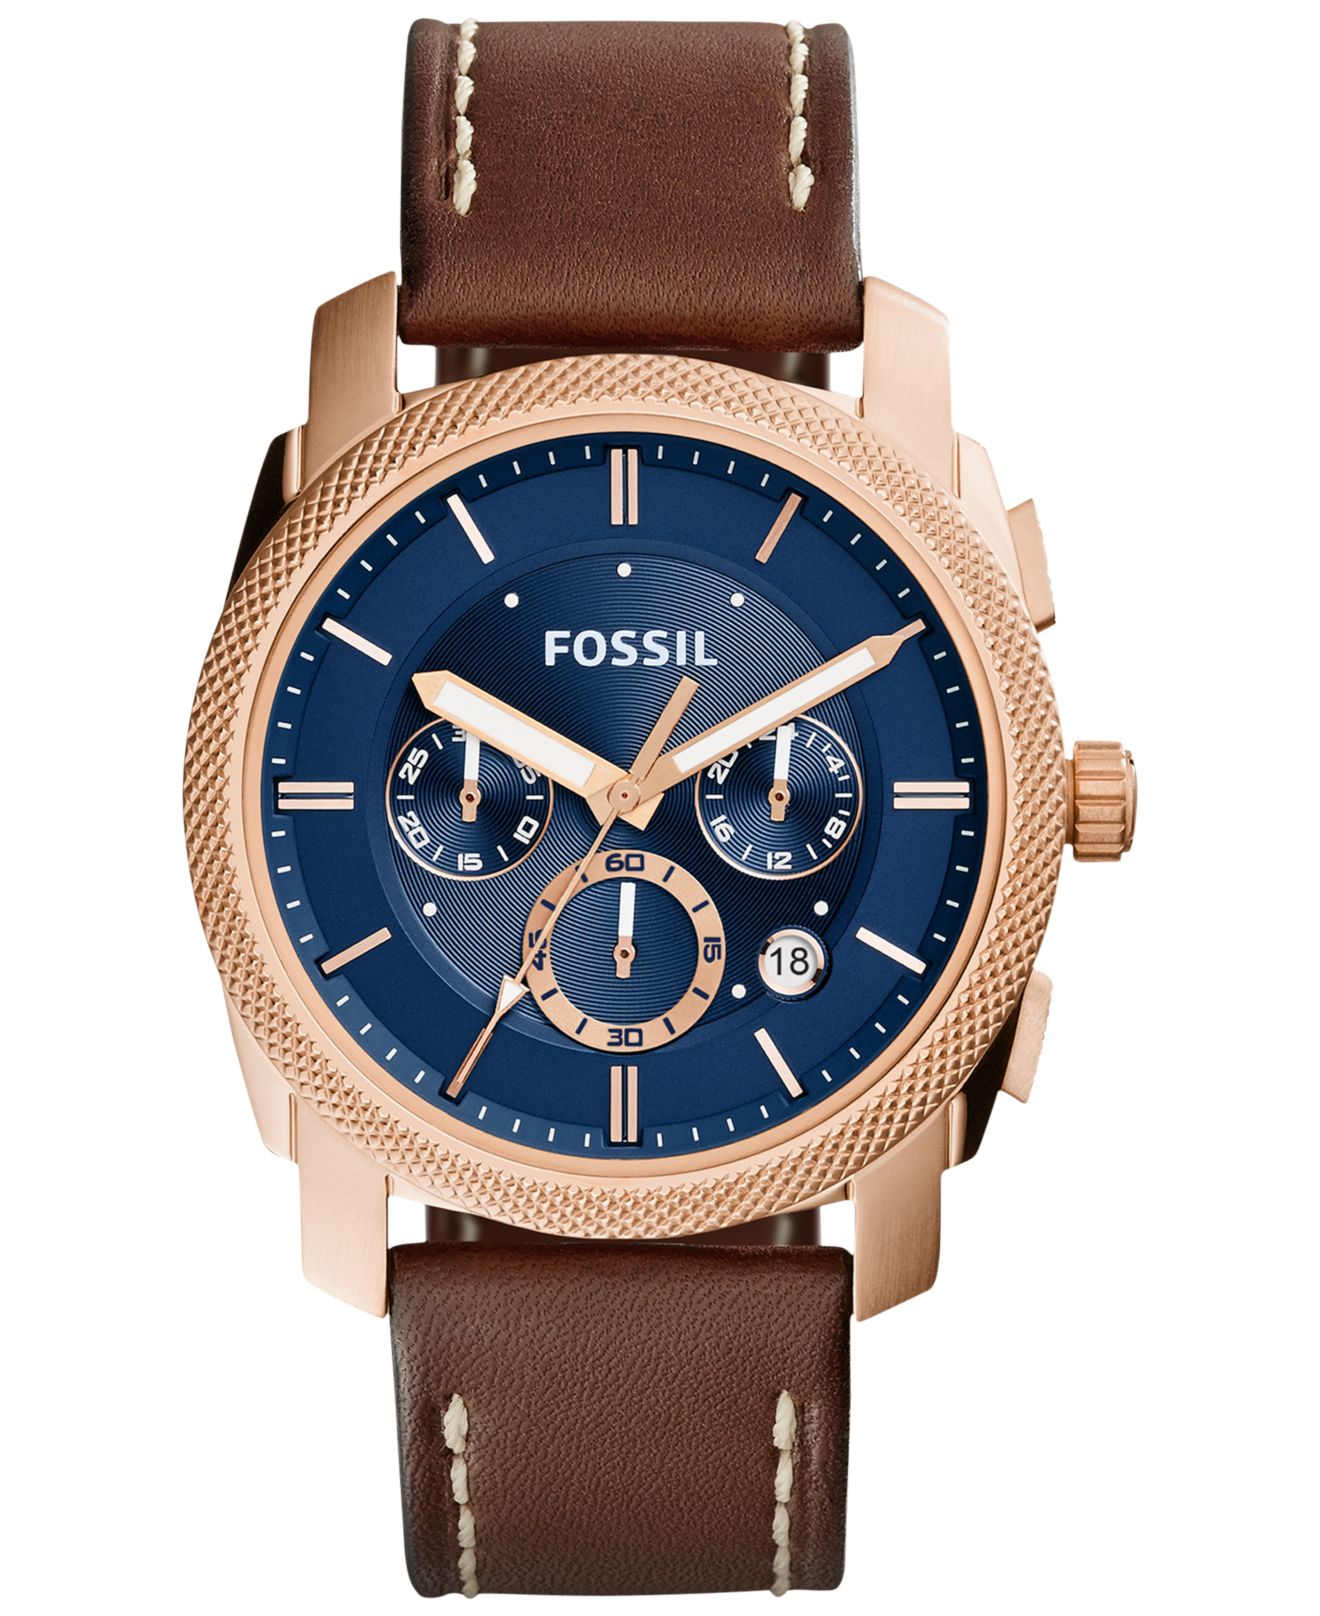 Lyst - Fossil Men's Chronograph Machine Brown Leather Strap Watch 42mm